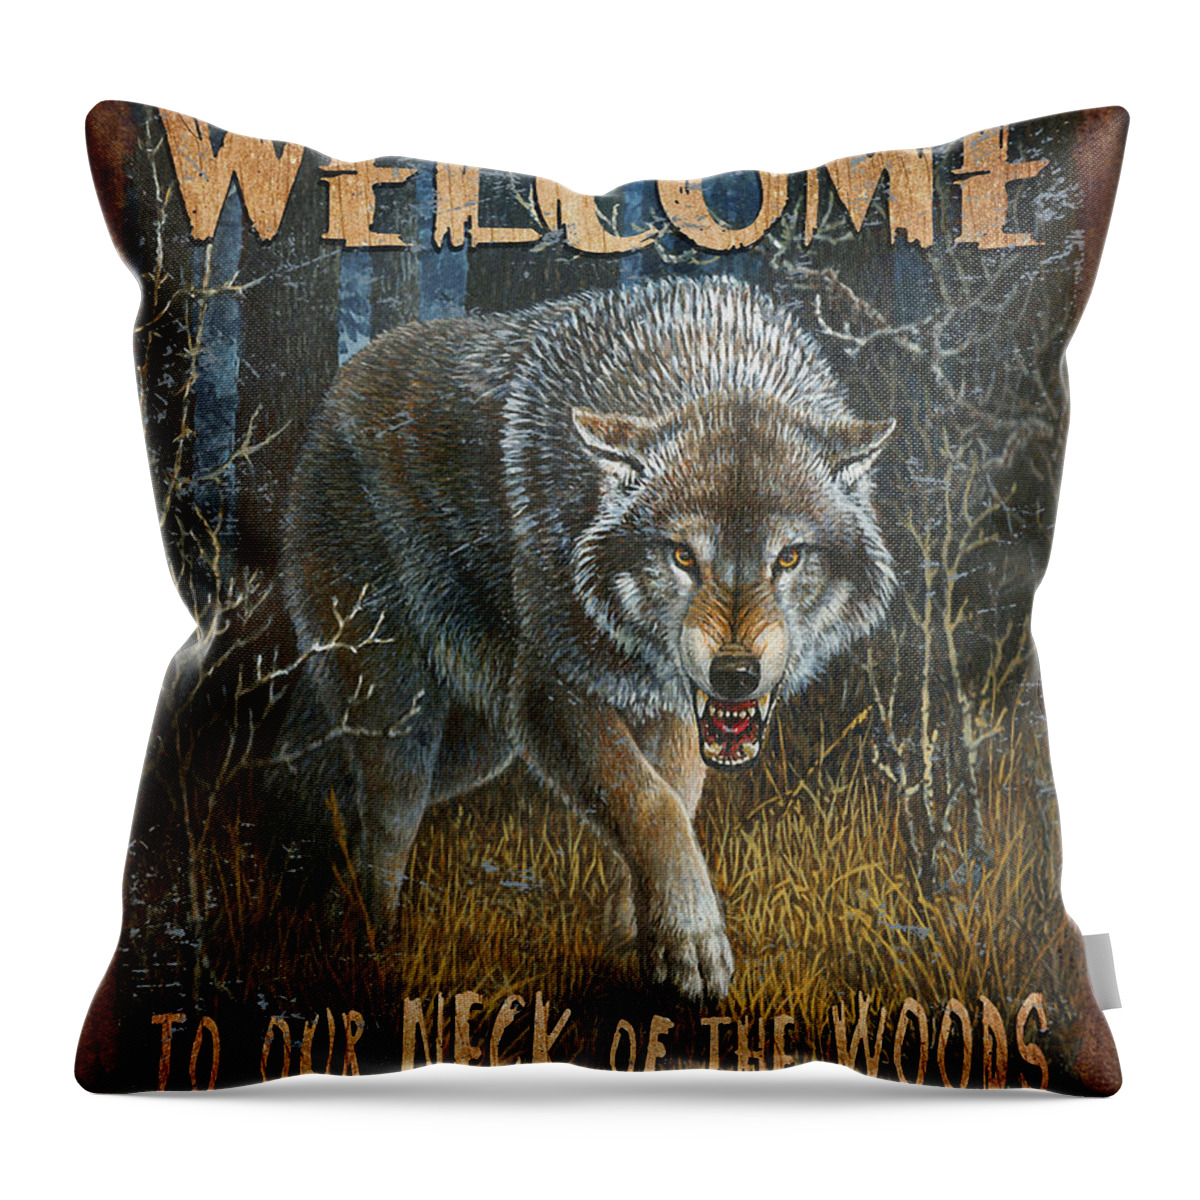 Wildlife Throw Pillow featuring the painting Wold Neck of the Woods by JQ Licensing